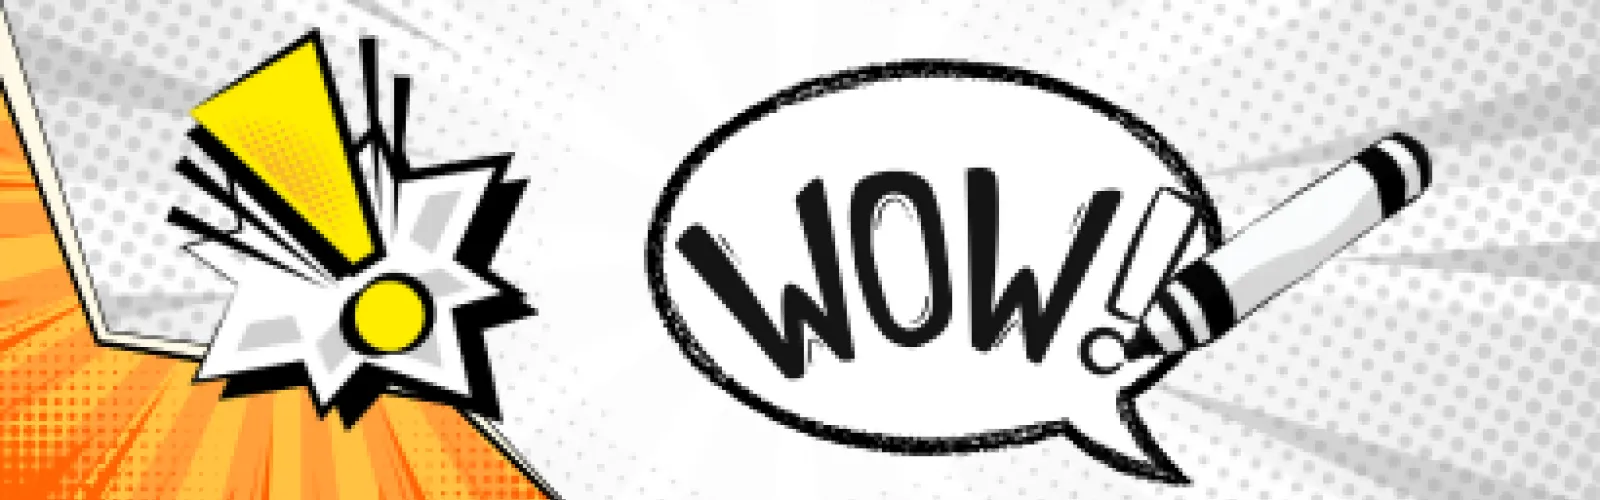 WOW! in a speech bubble with a marker and exclamation point comic book style